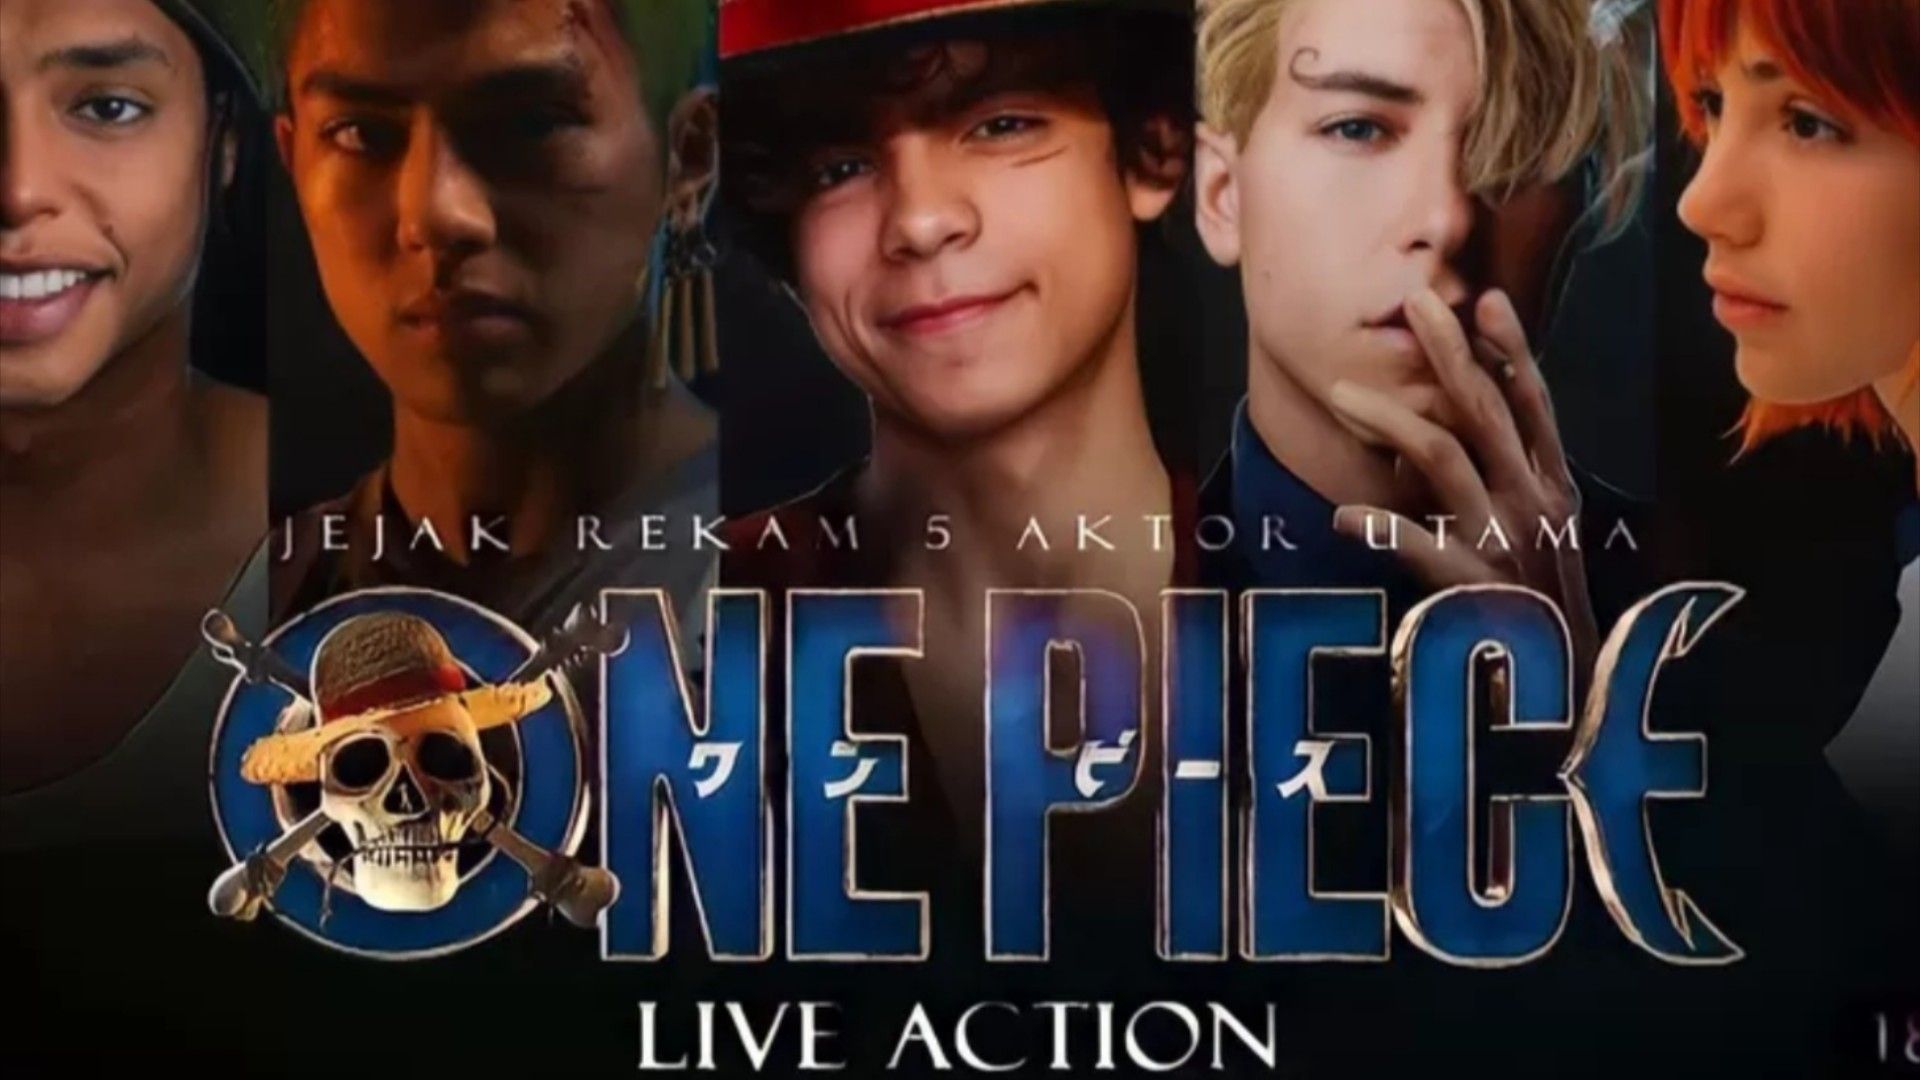 The first image of One Piece live-action series for Netflix is